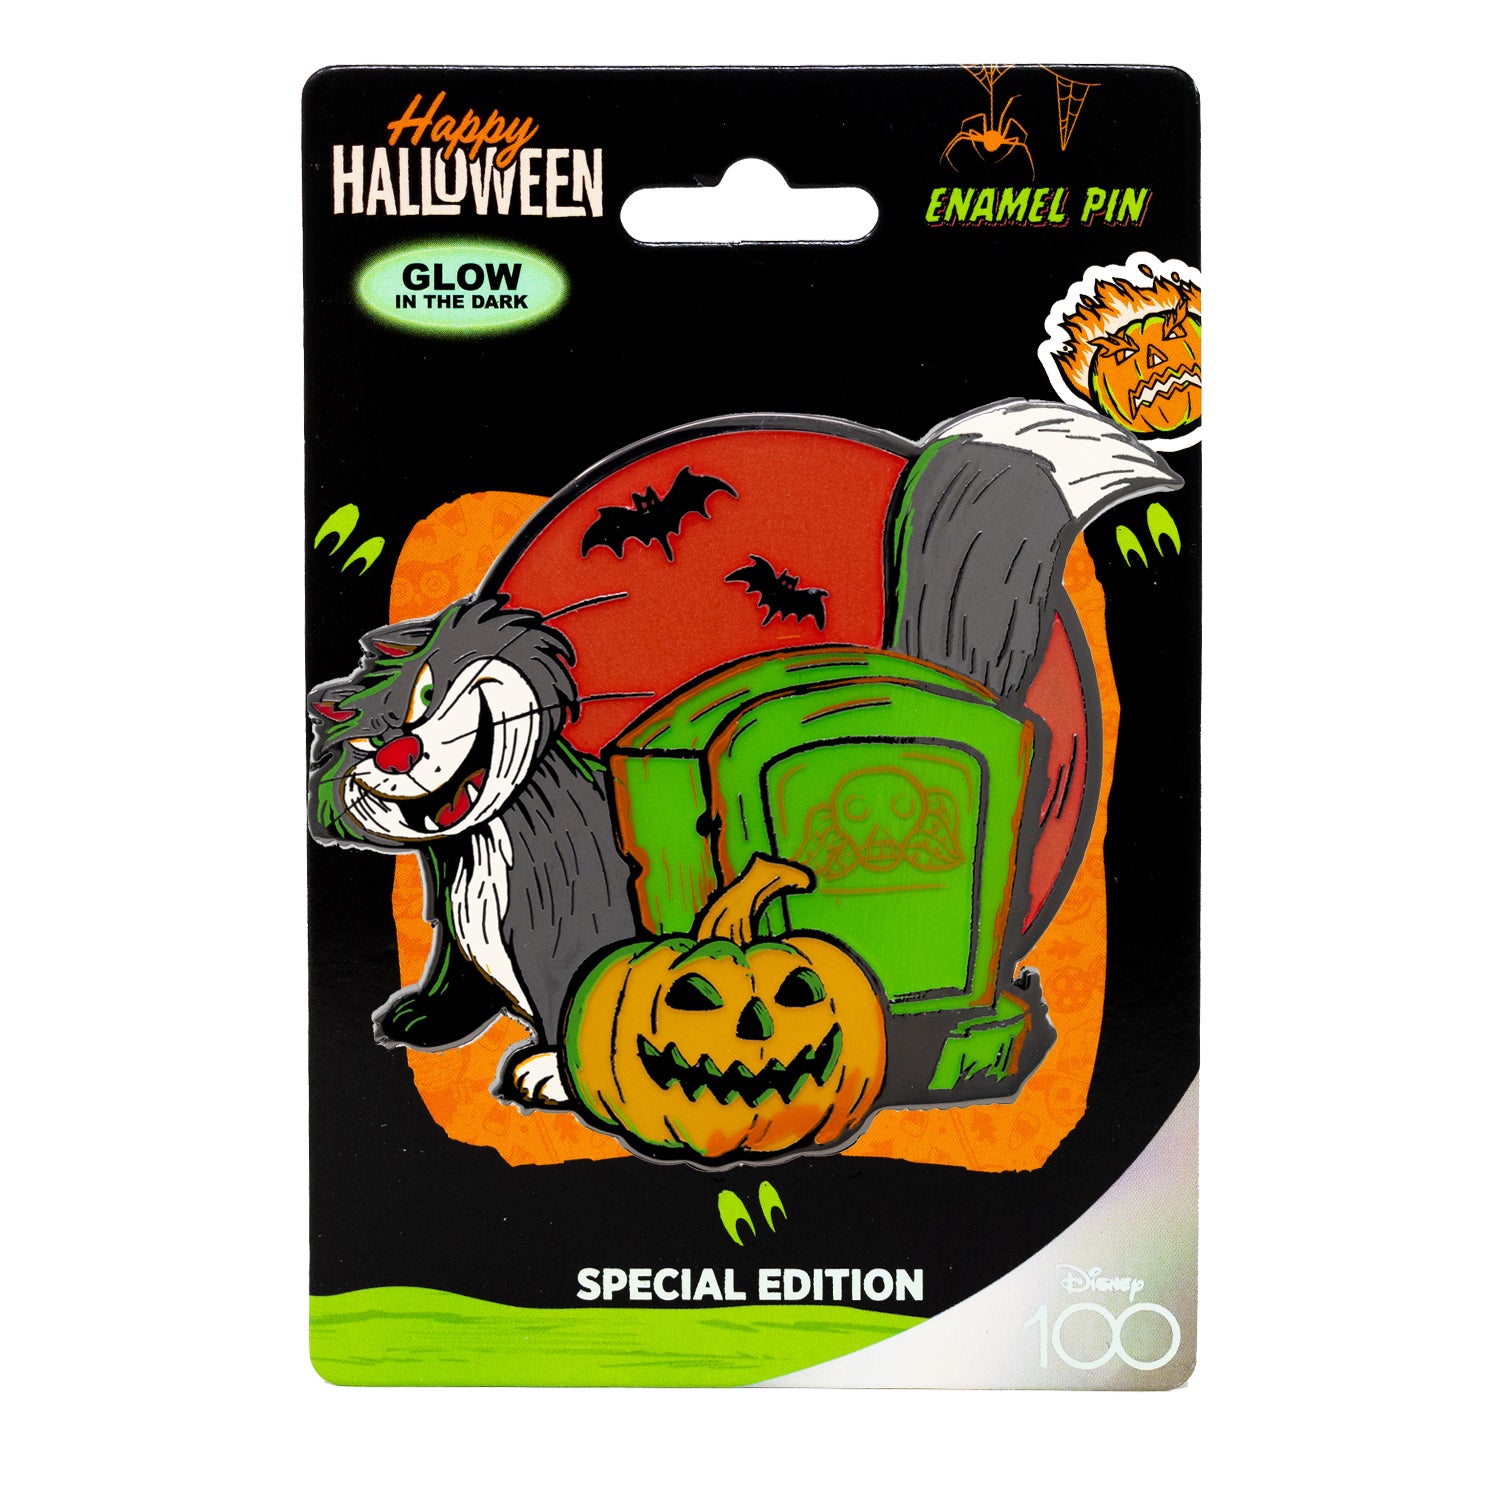 Disney Happy Halloween Series Glow in the Dark Lucifer 3" Special Edition 1/300 Pin